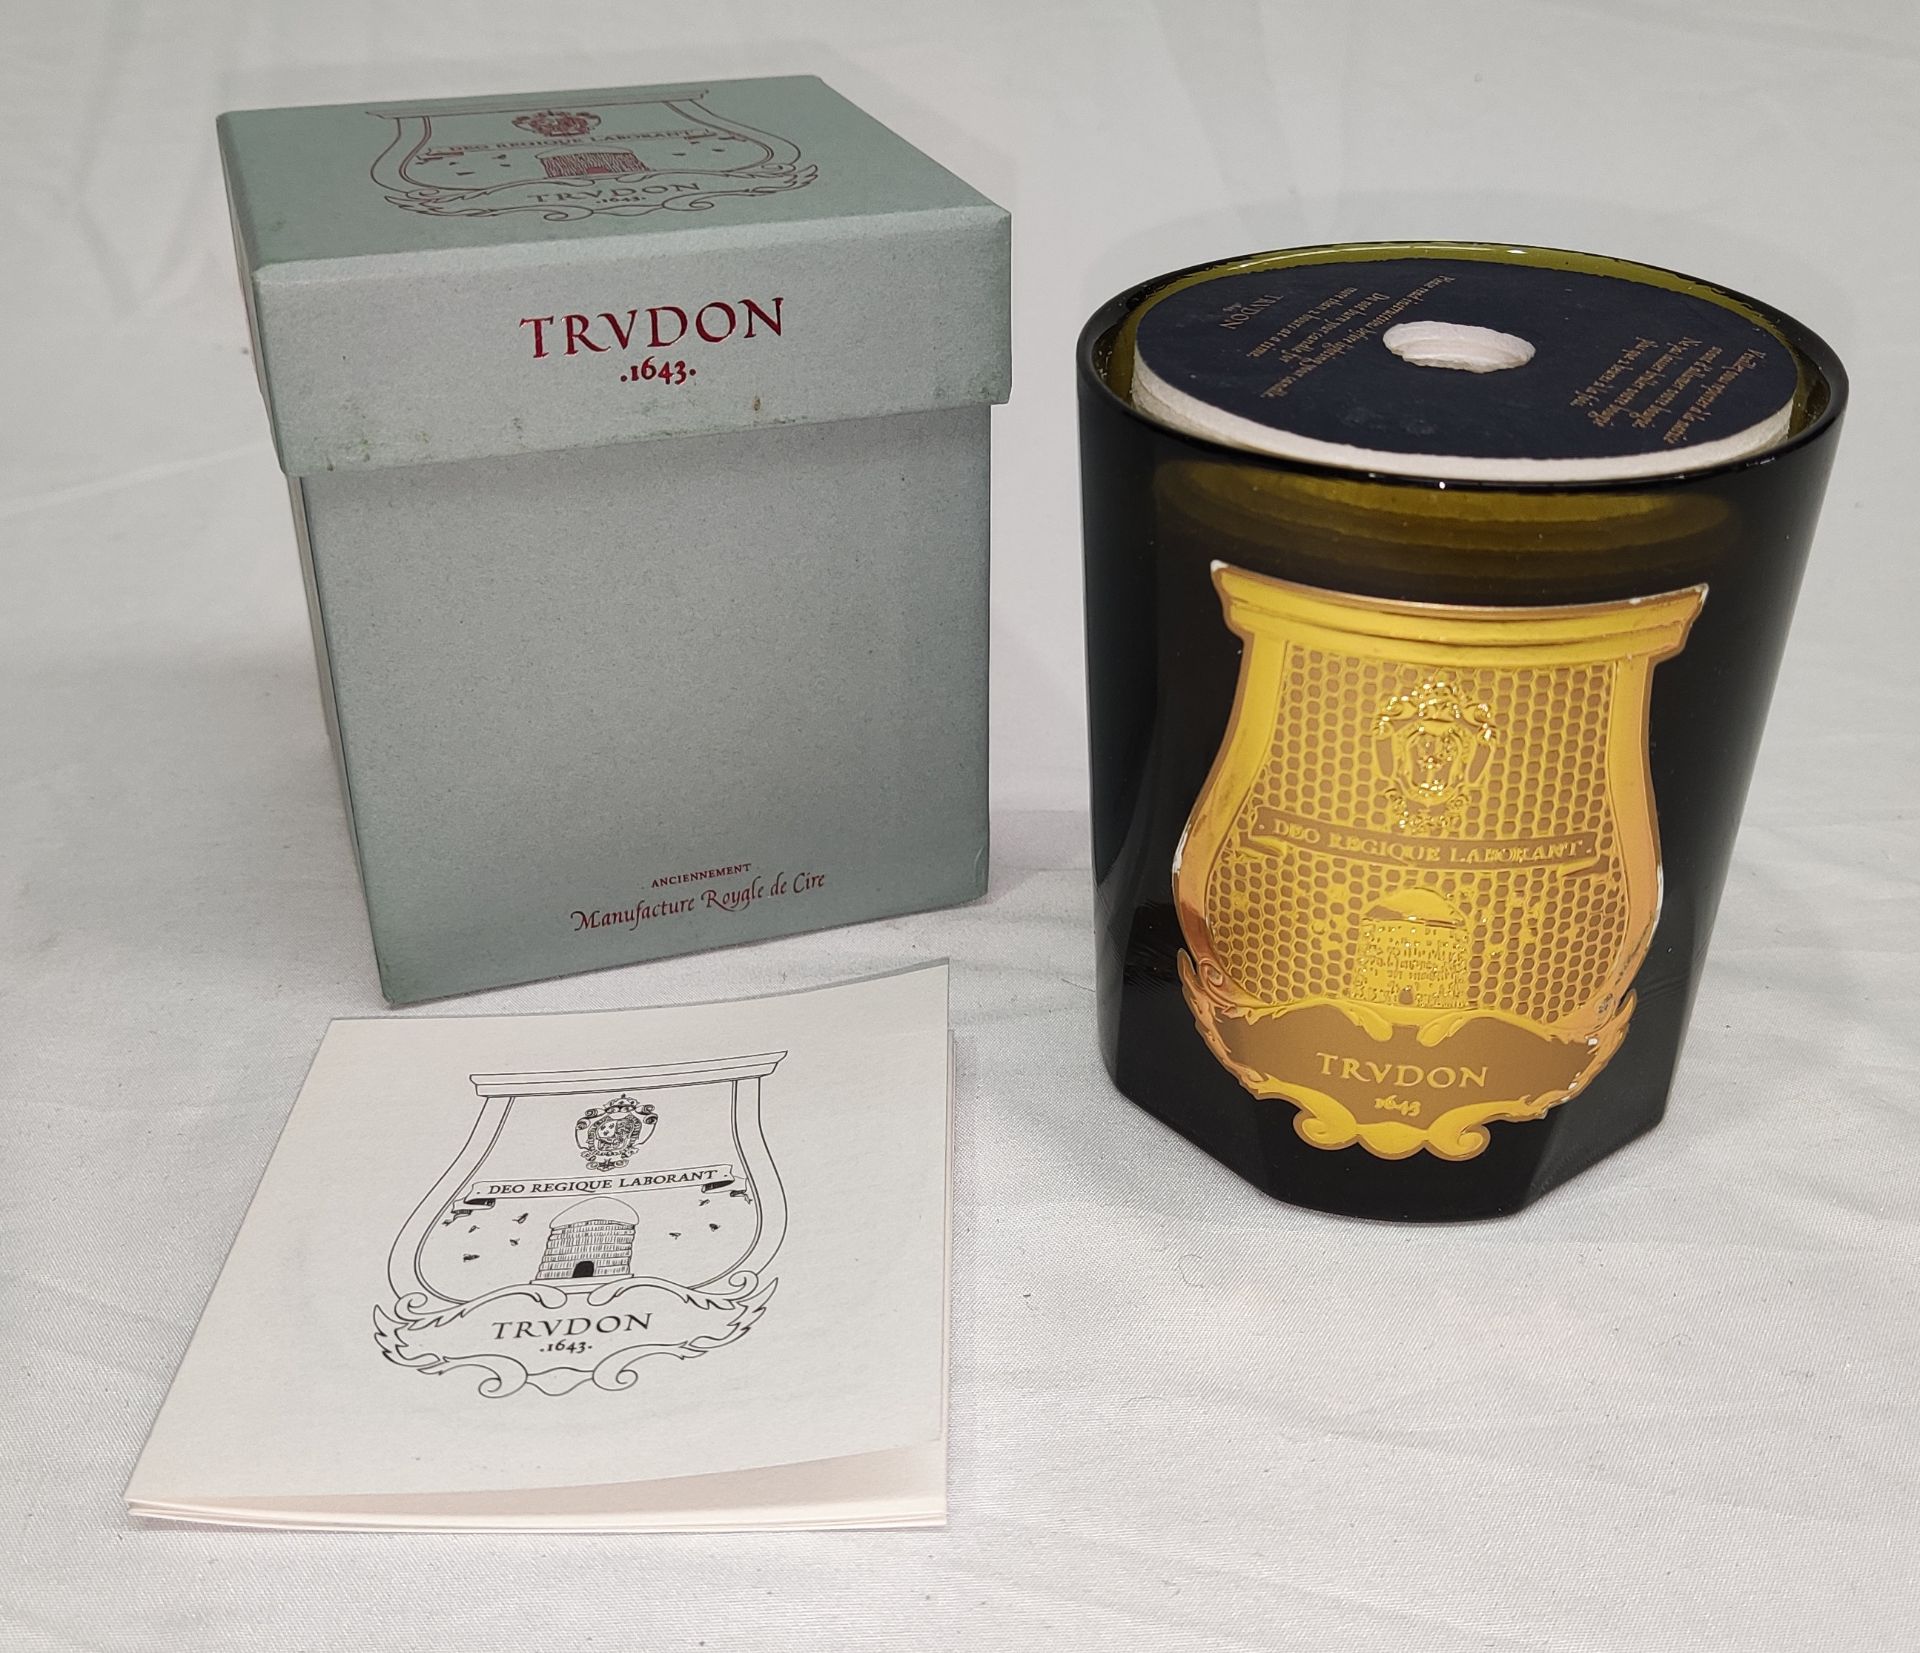 1 x TRUDON Ernesto 270G Candle - New/Boxed - Original RRP £90 - Ref: 2559342/HJL441/C28/07-23 - - Image 7 of 19